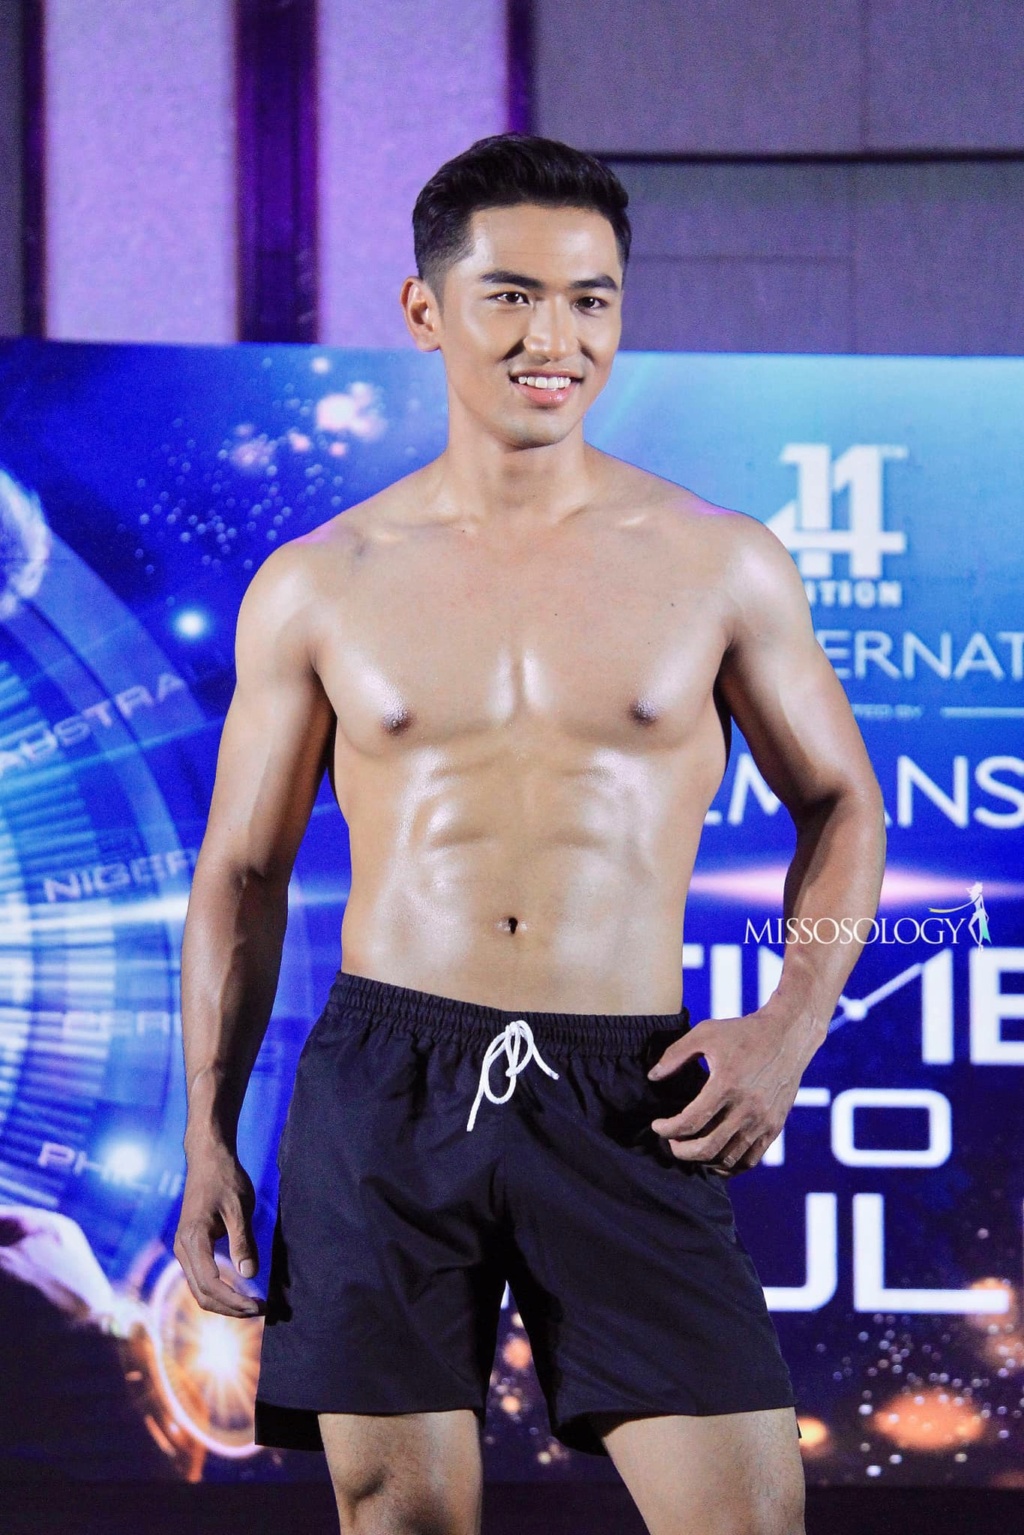 14th Mister International in Manila, Philippines - Oct 30th, 2022 - Winner is Dominican Republic 31245611